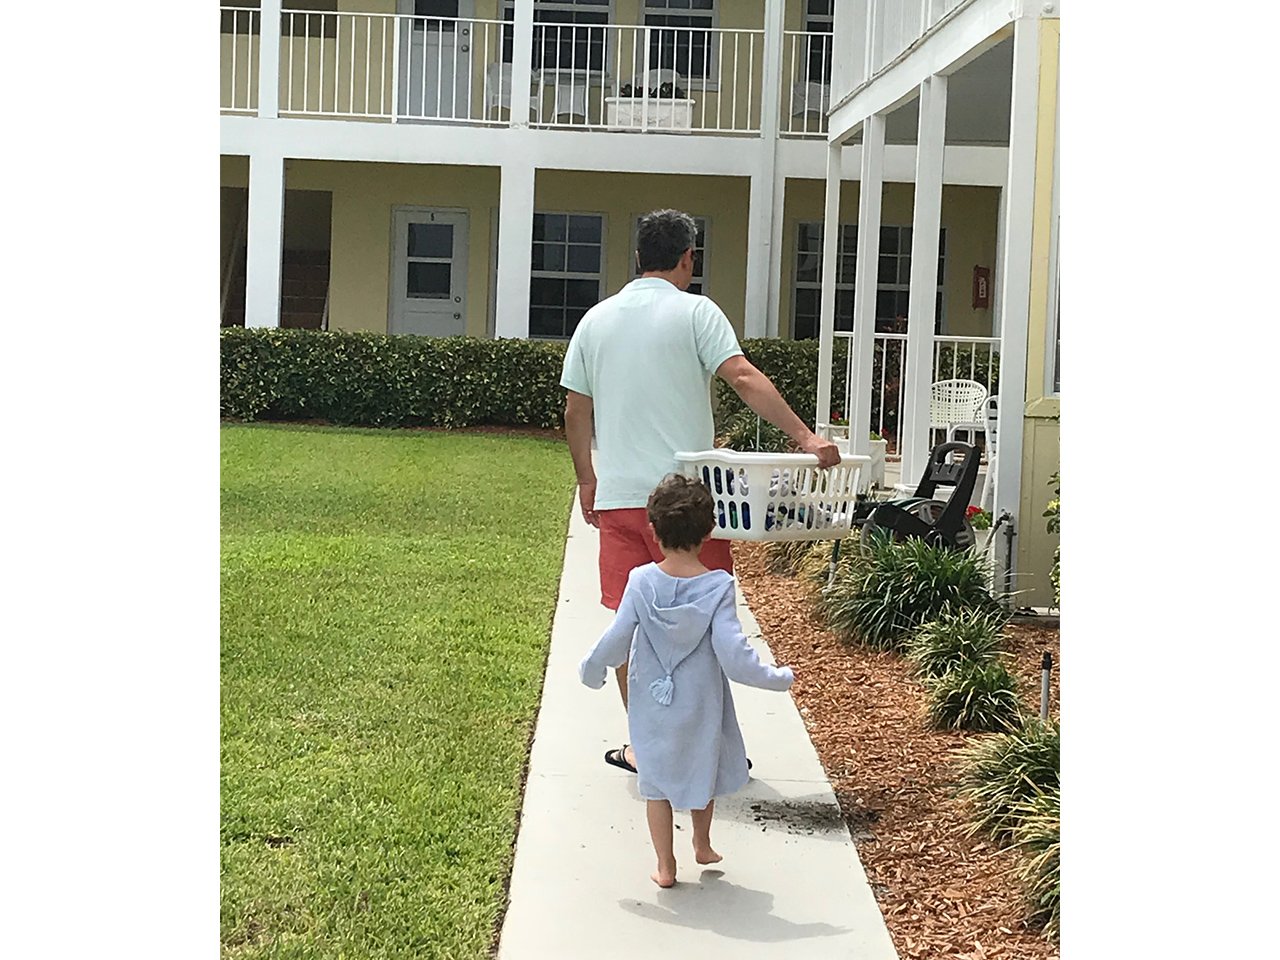 A dad holding a laundry basket with a little boy walking behind him up a pathway at a beach resort